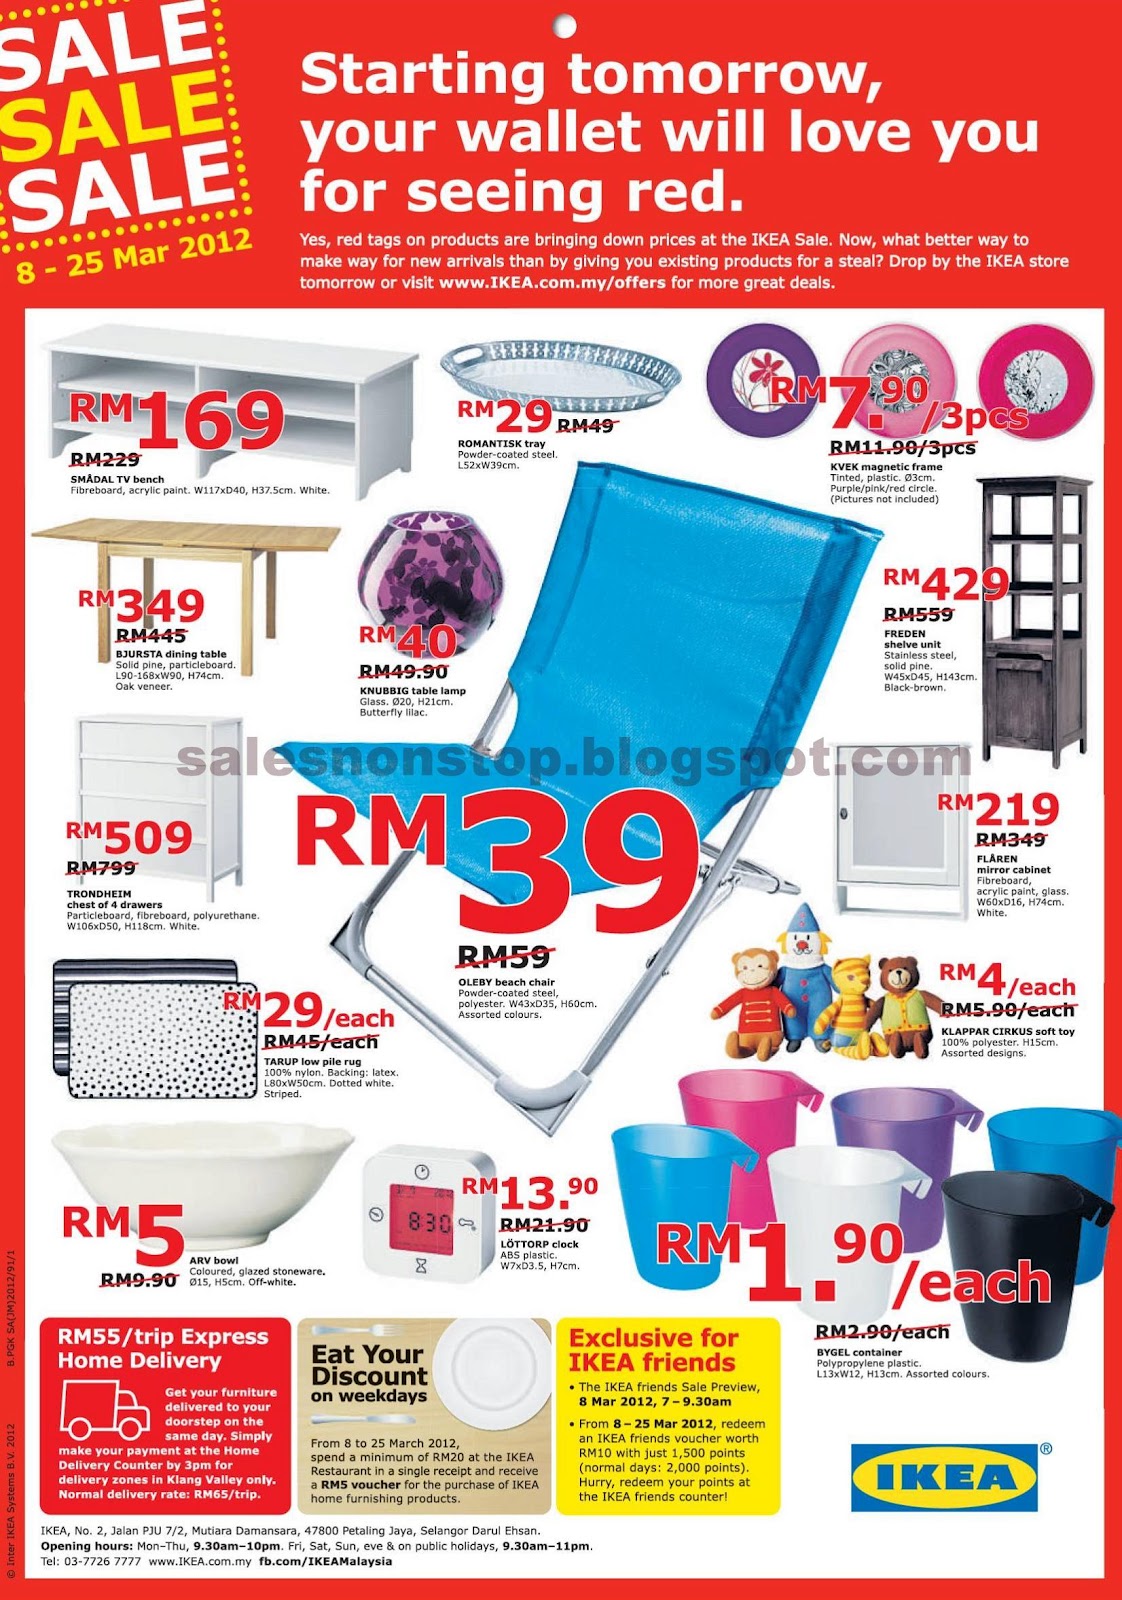 IKEA Malaysia Sale ~ March 2012 | Sales nonstop